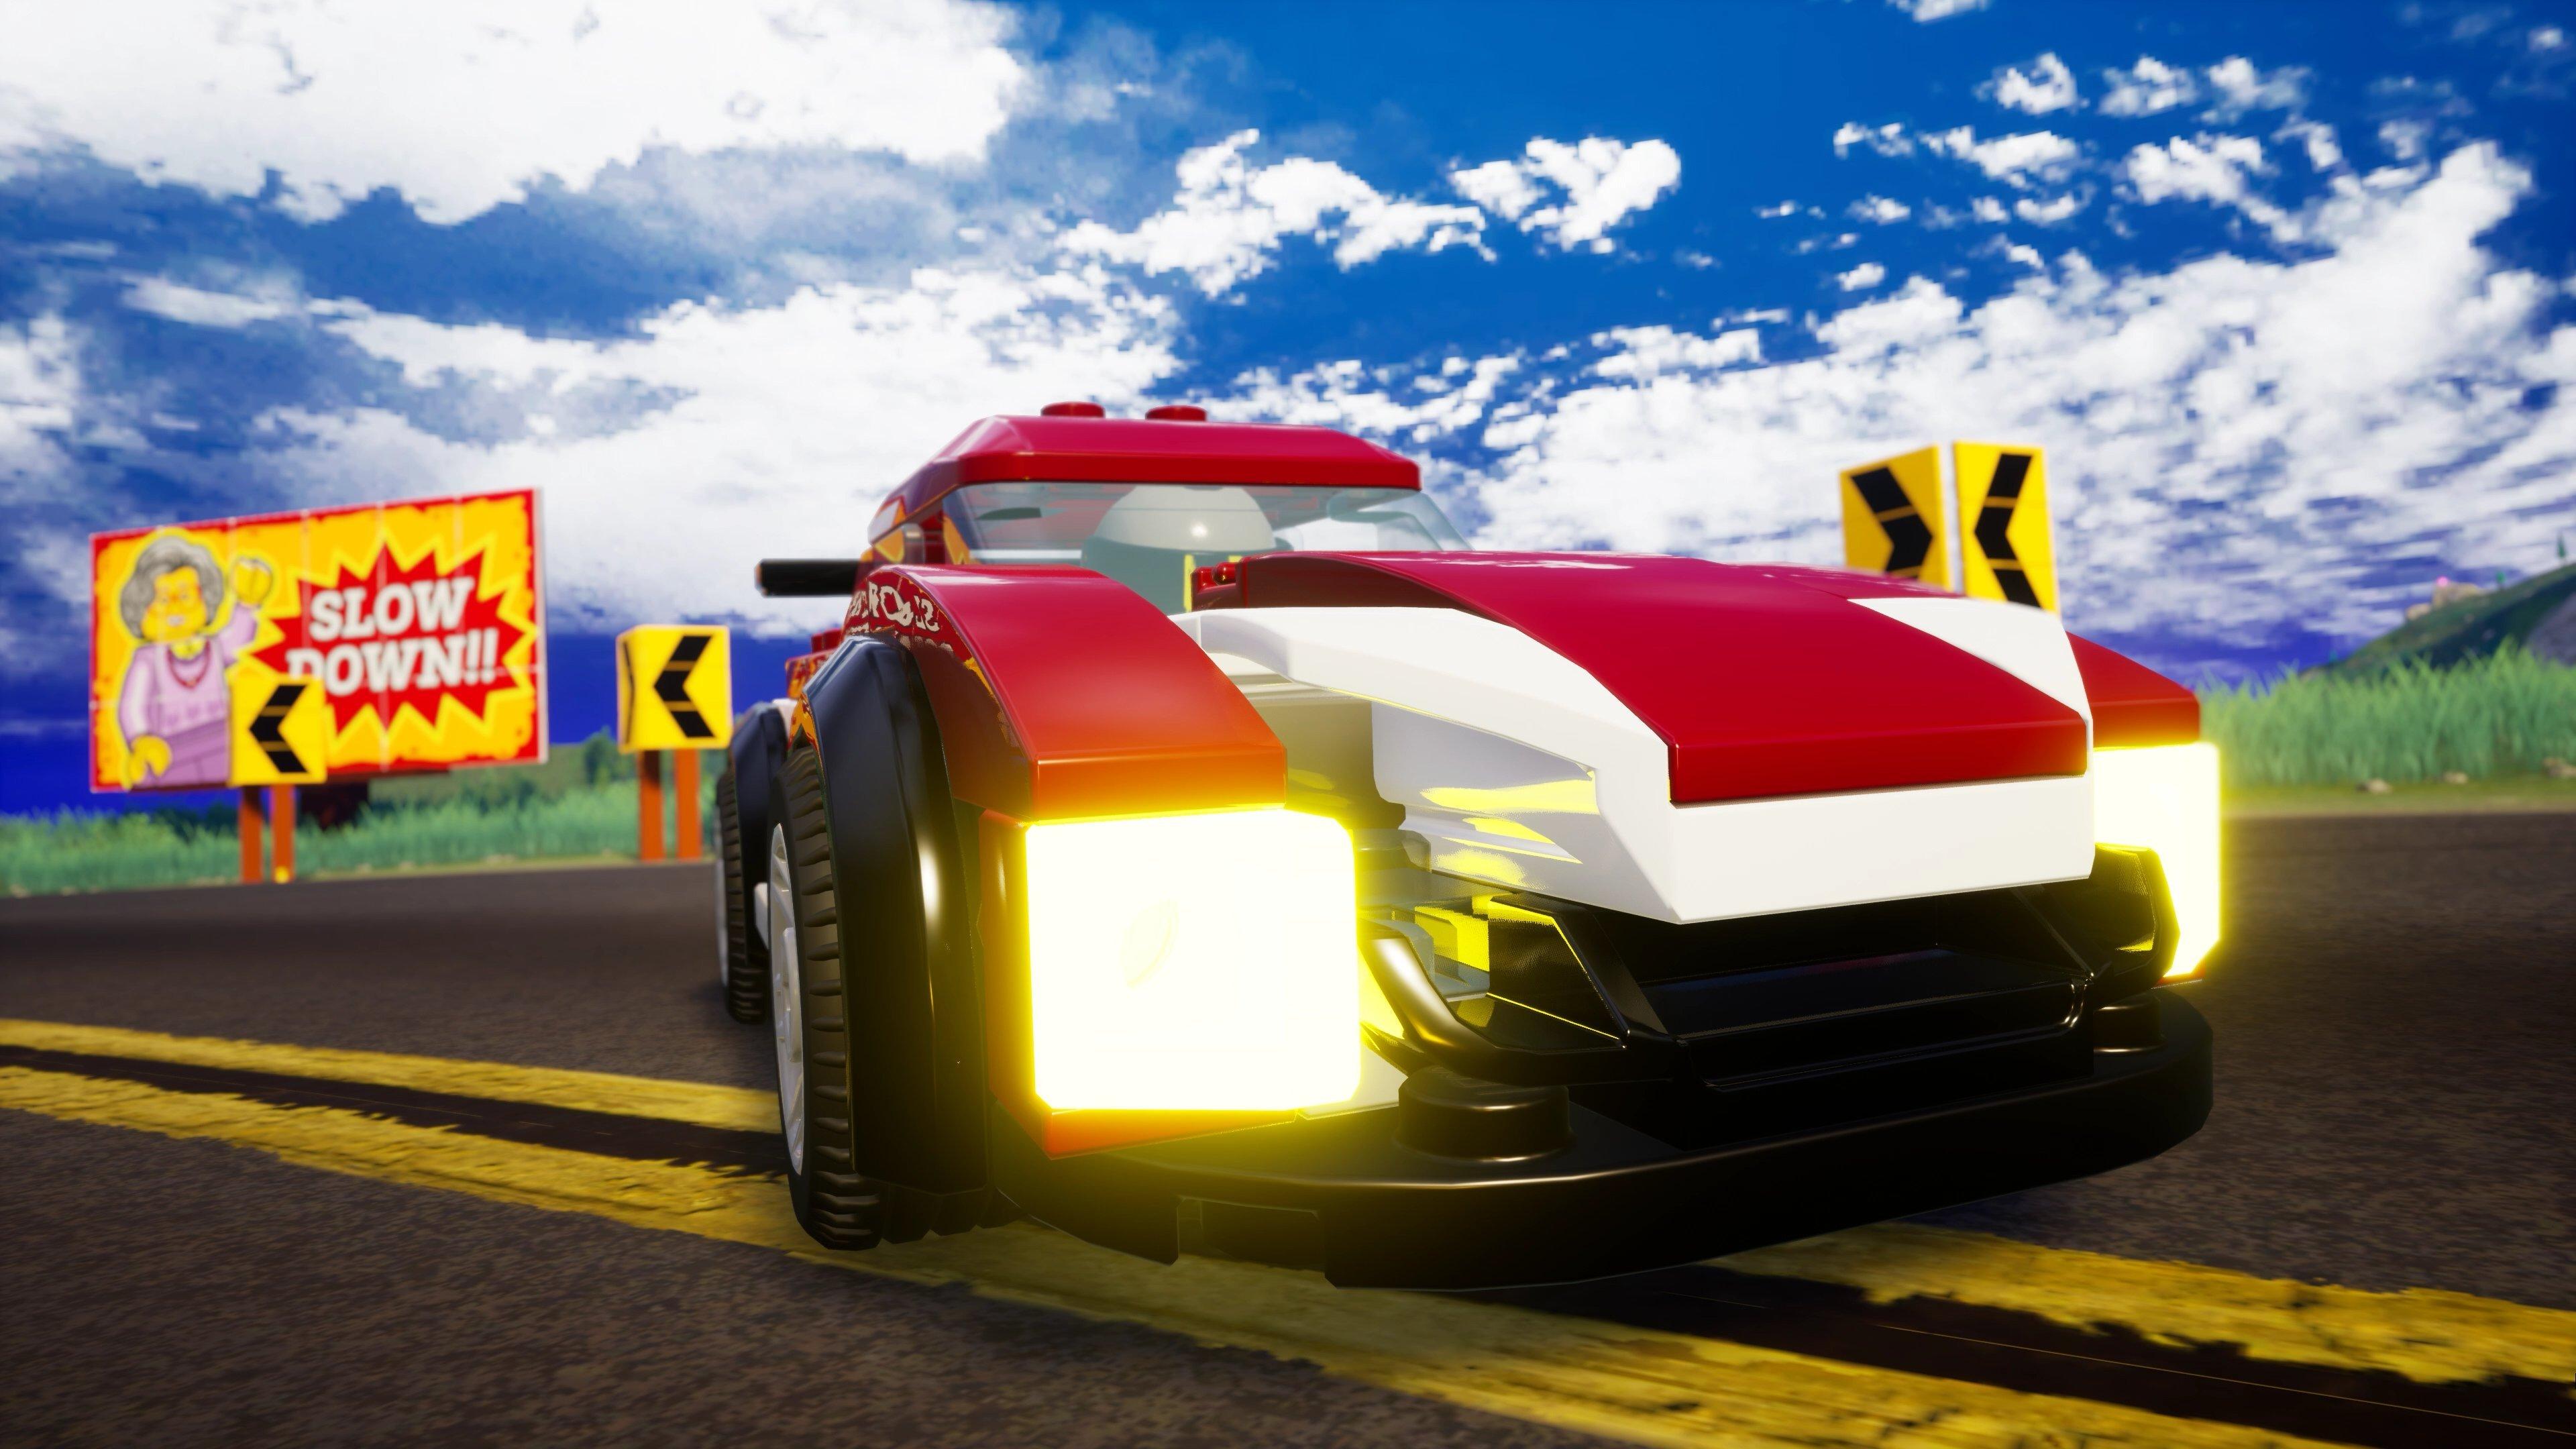 Can you code gaming's smartest race cars?